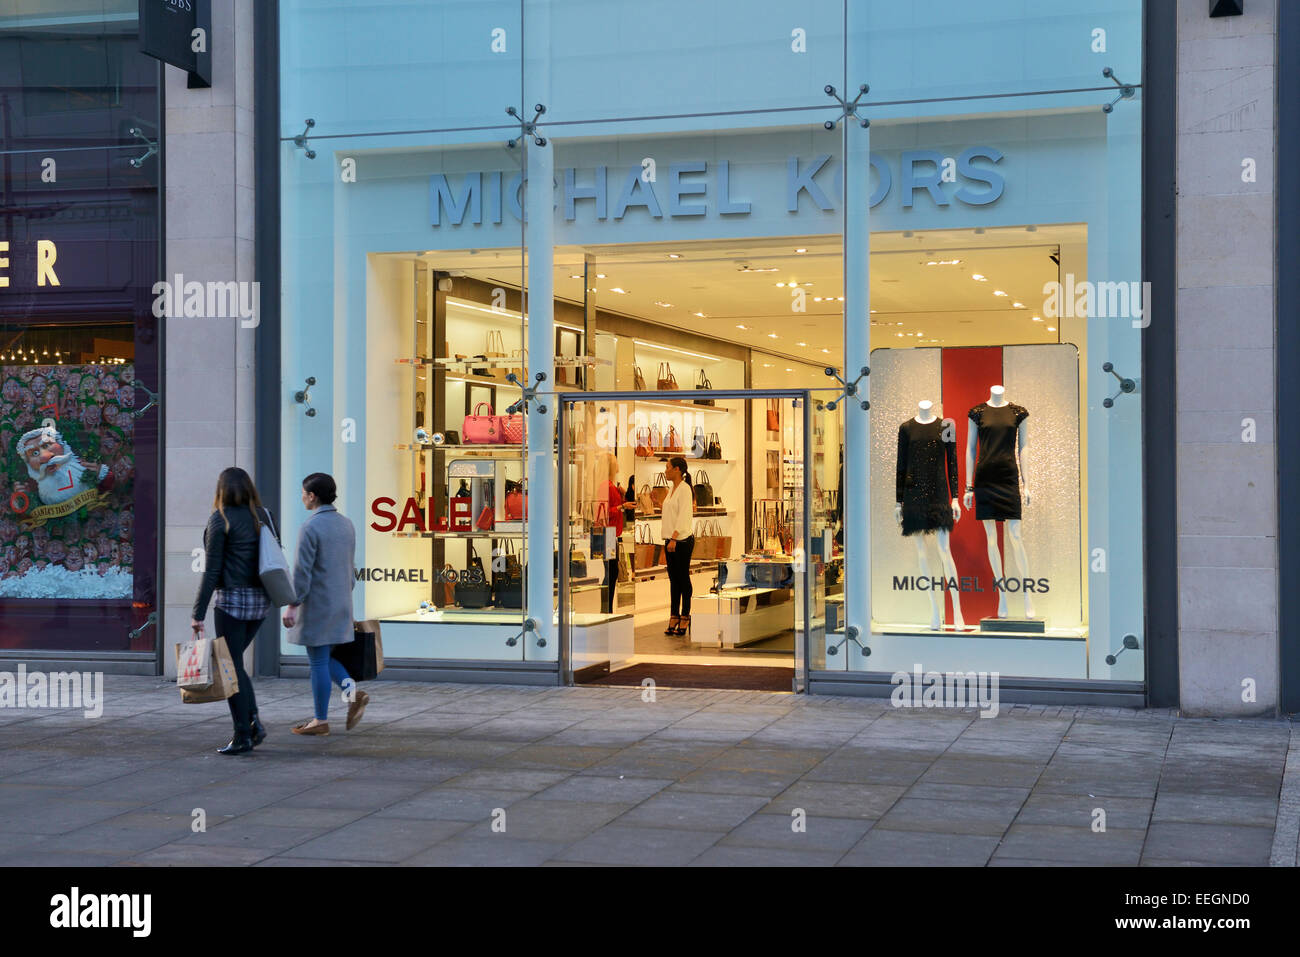 Micheal Kors iconic fashion clothing shop in Manchester Stock Photo - Alamy